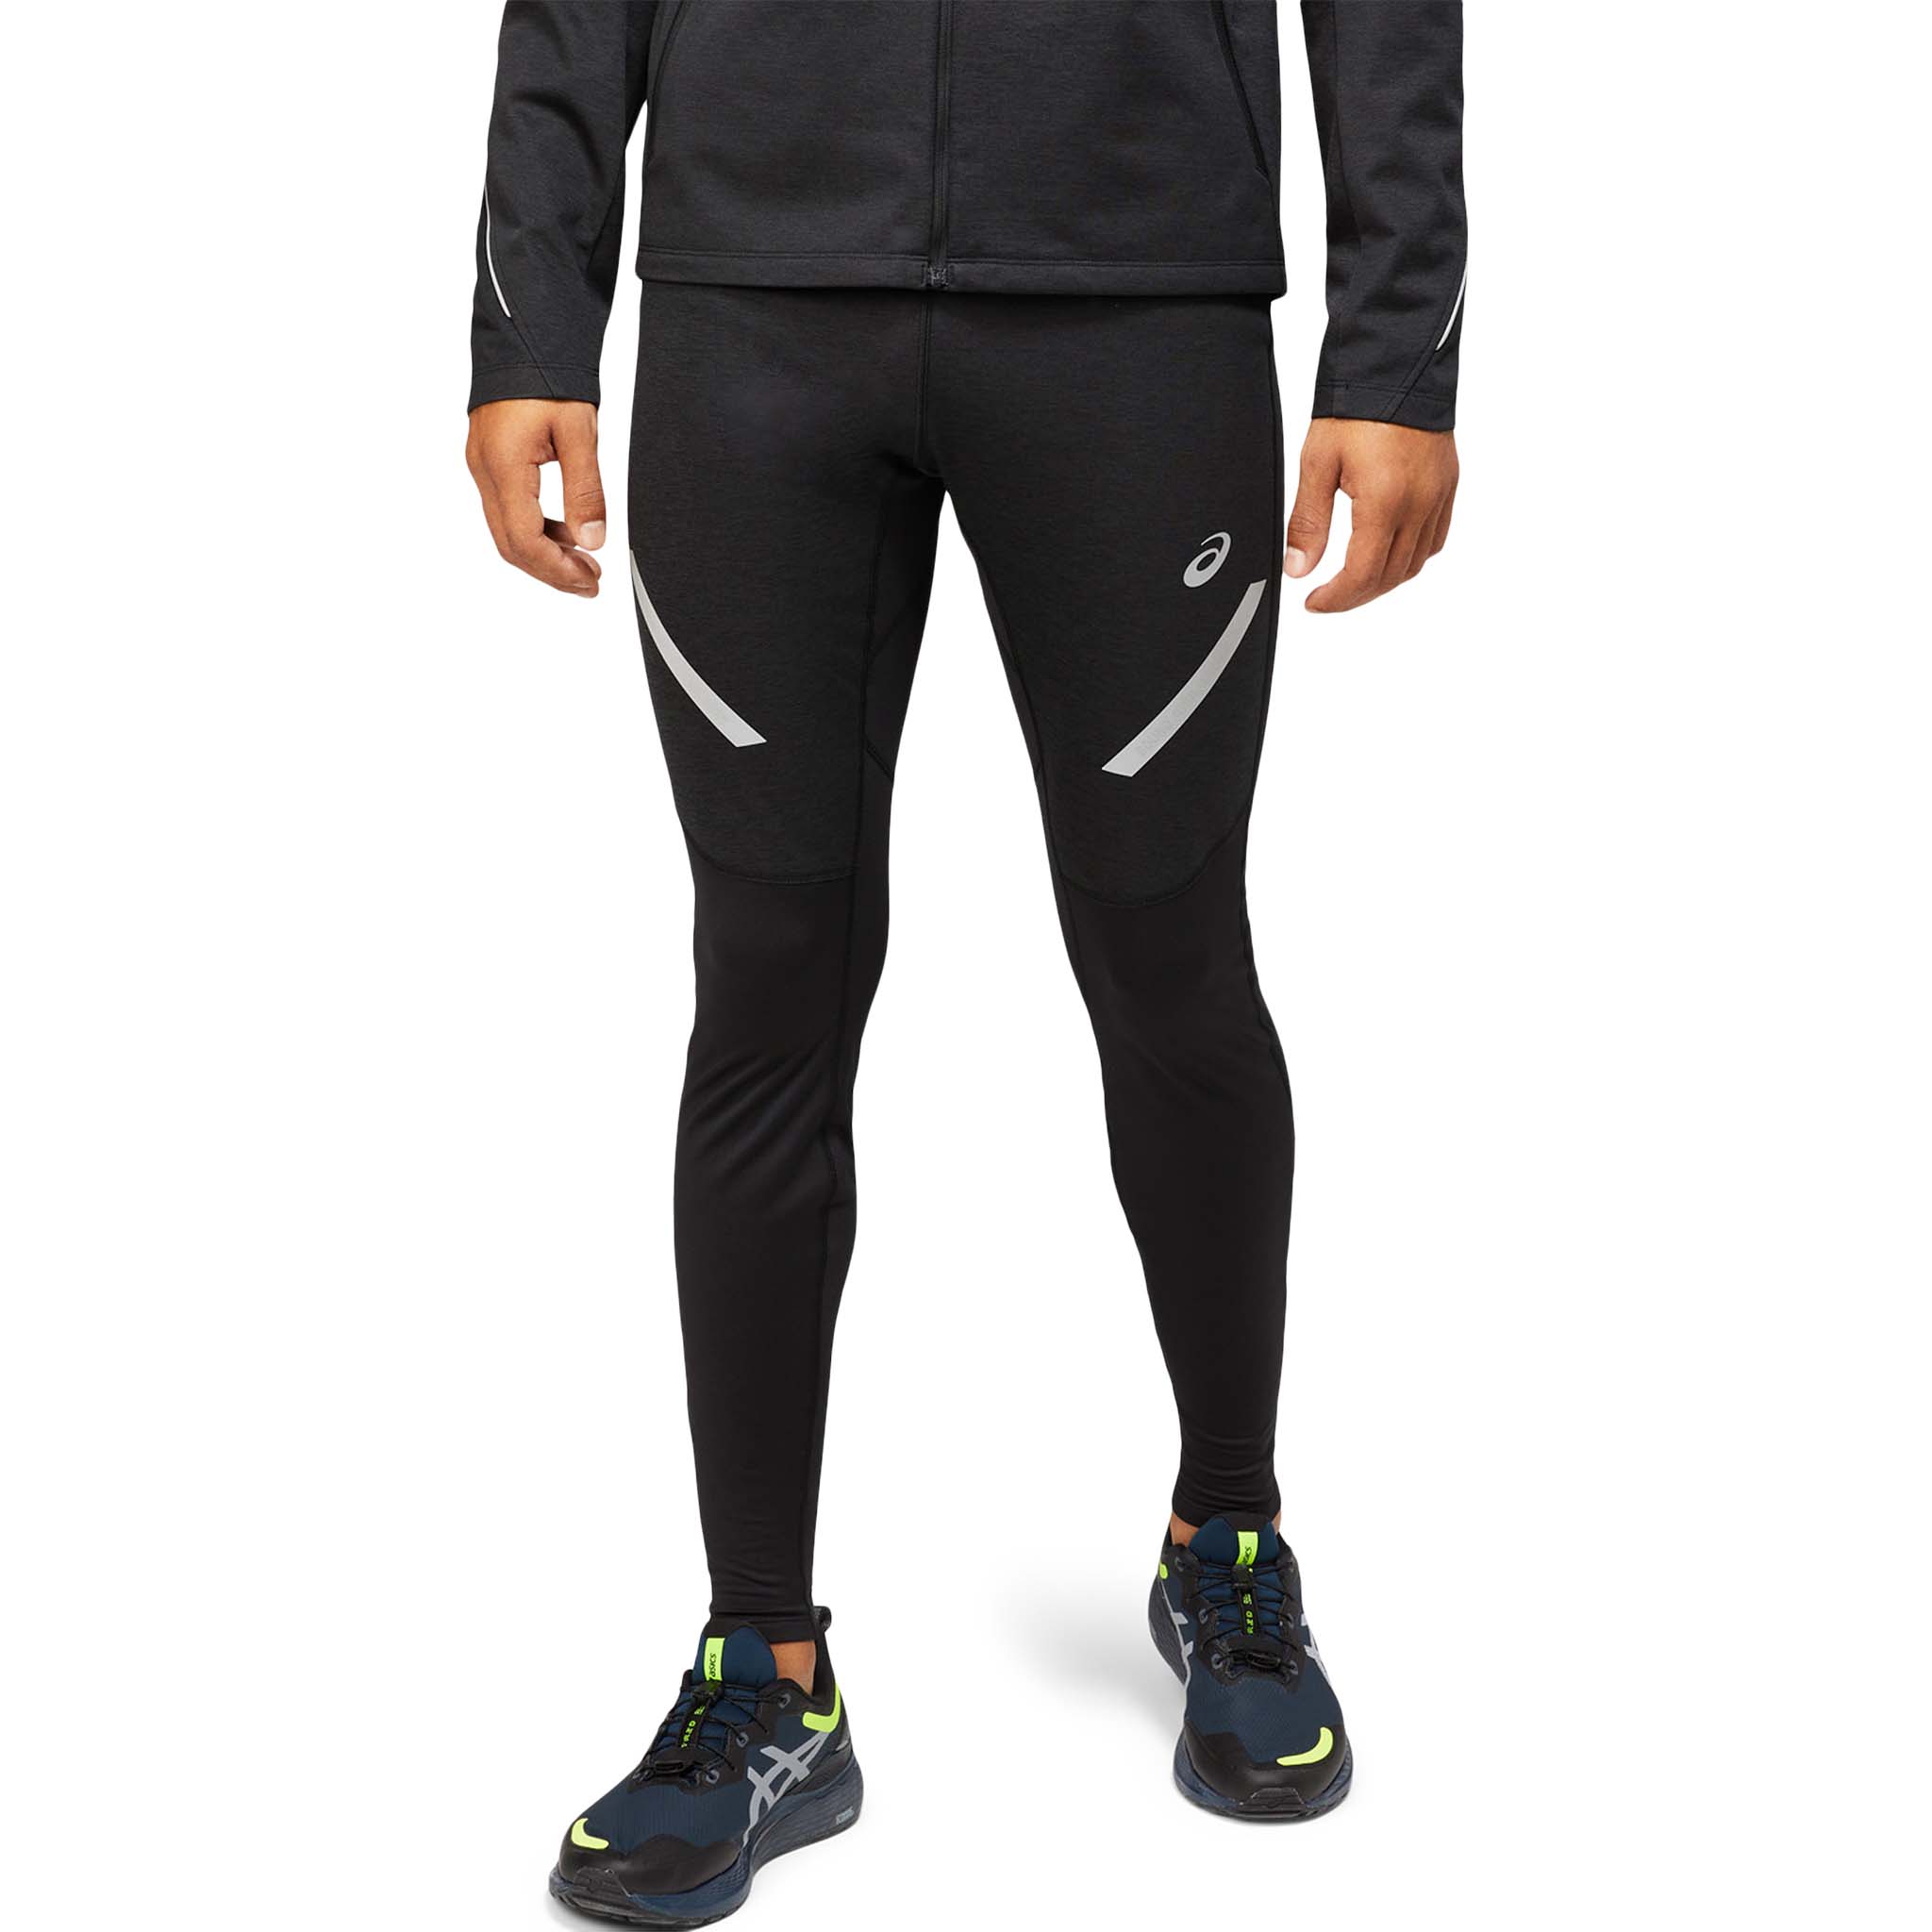 The Top Twelve Running Tights For Men - Psycho Wyco